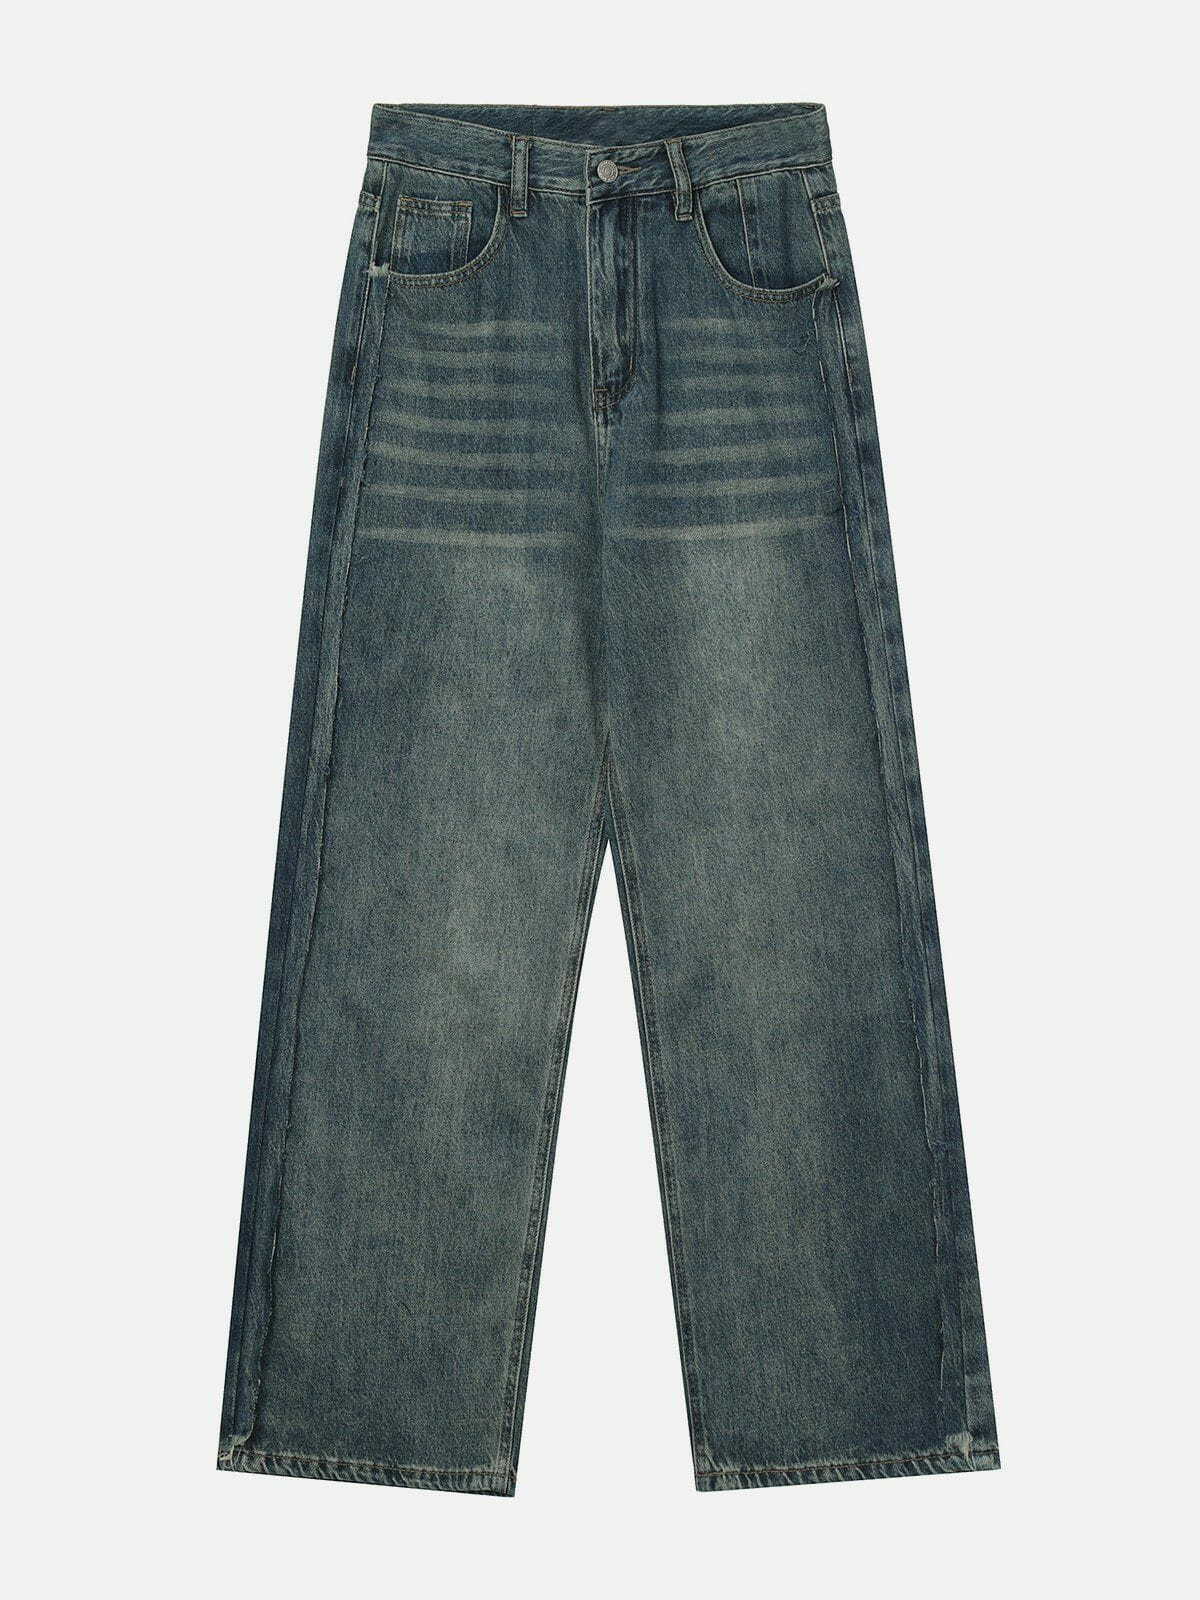 retro washed jeans with rough edge detail 5111